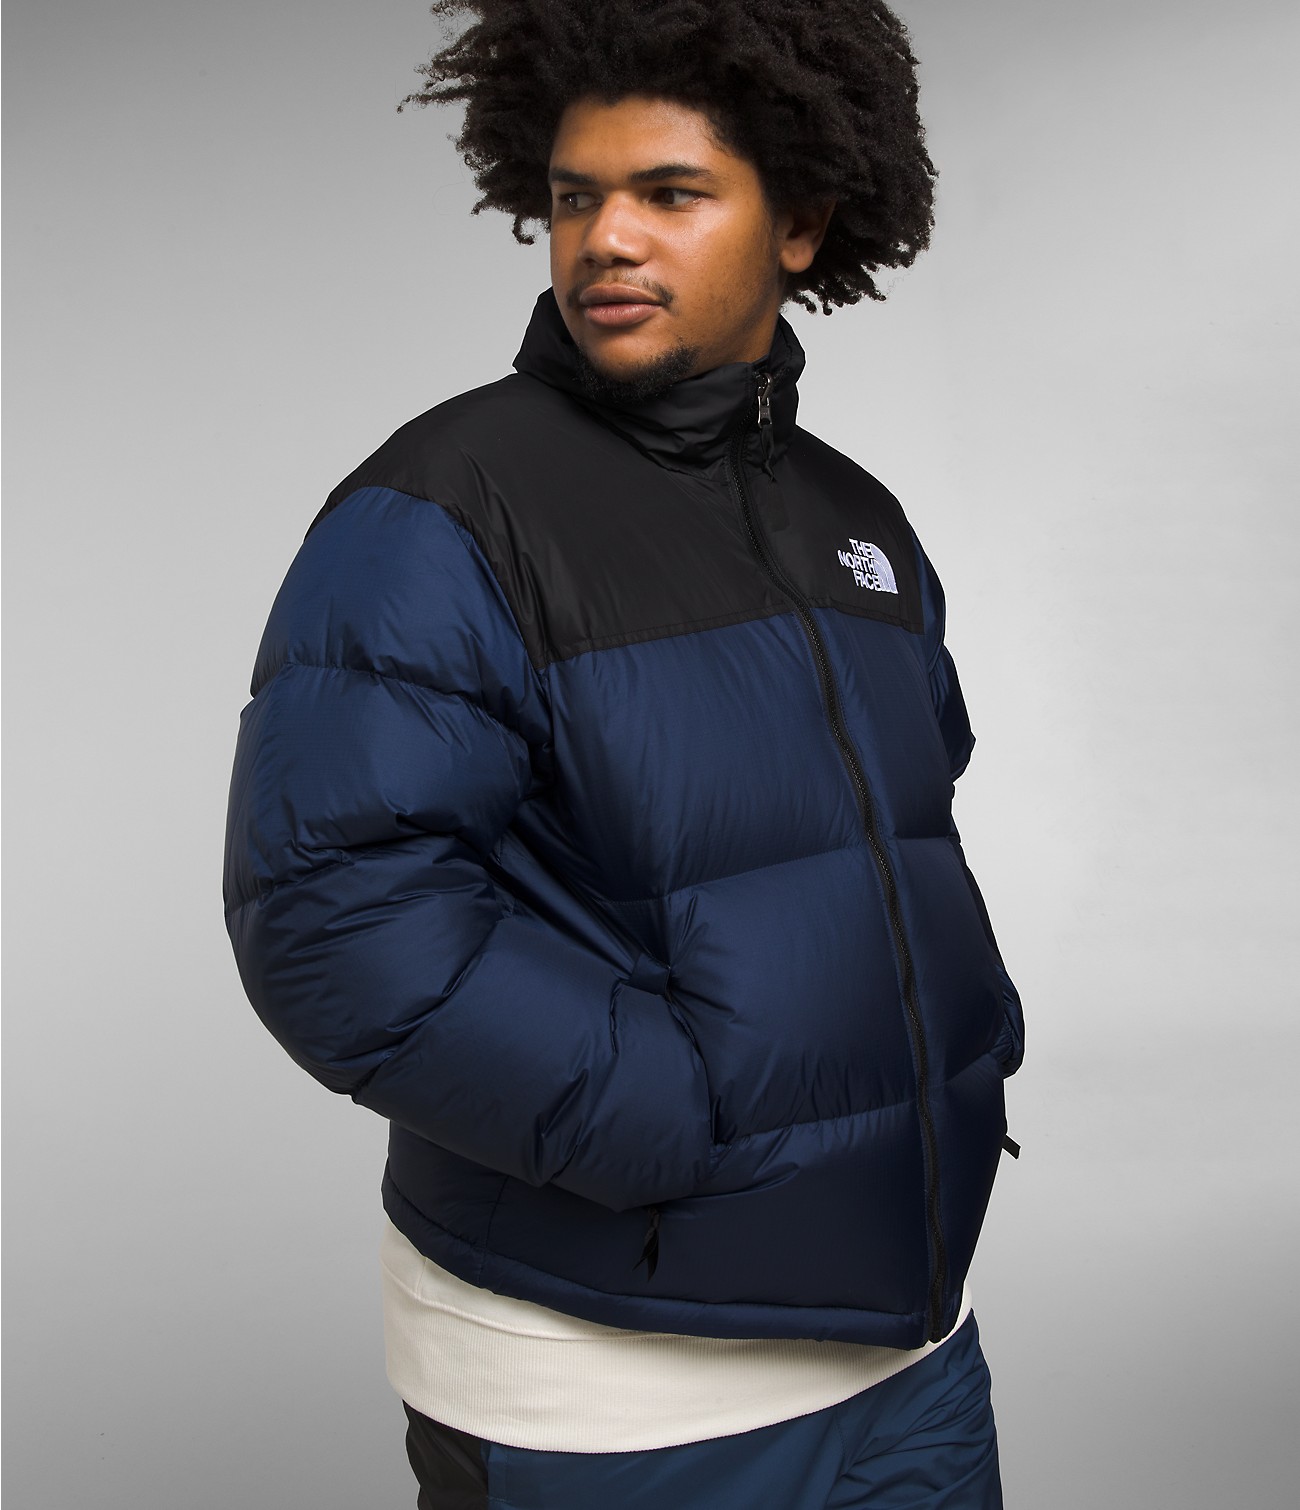 Unlock Wilderness' choice in the Woolrich Vs North Face comparison, the 1996 Retro Nuptse Jacket by The North Face